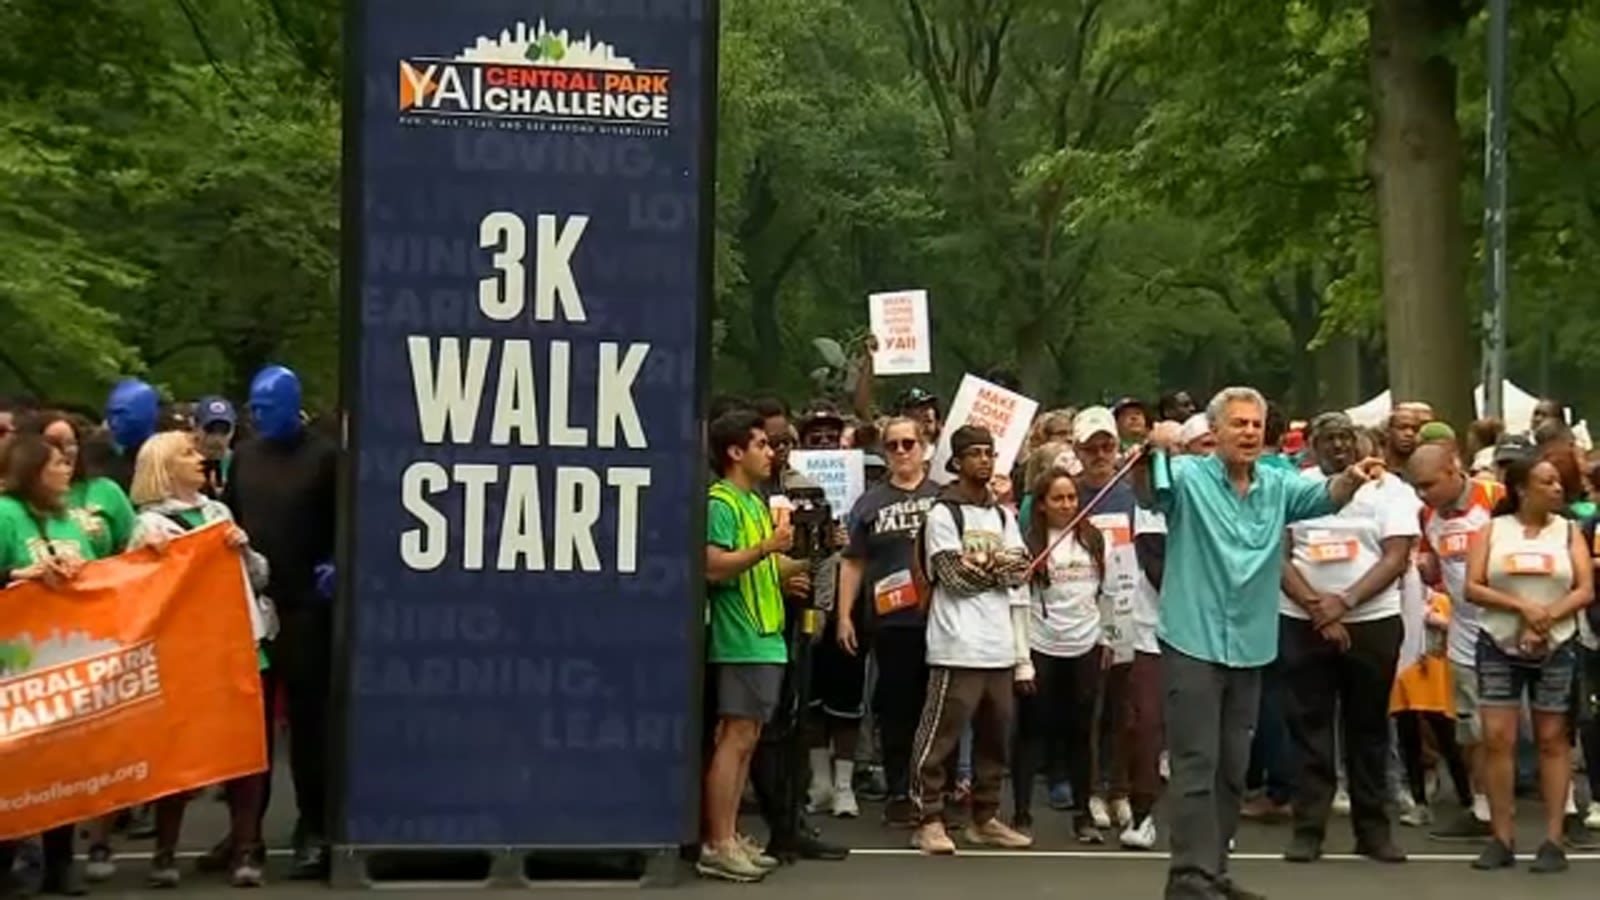 YAI hosts Central Park Challenge celebrating people with intellectual, developmental disabilities